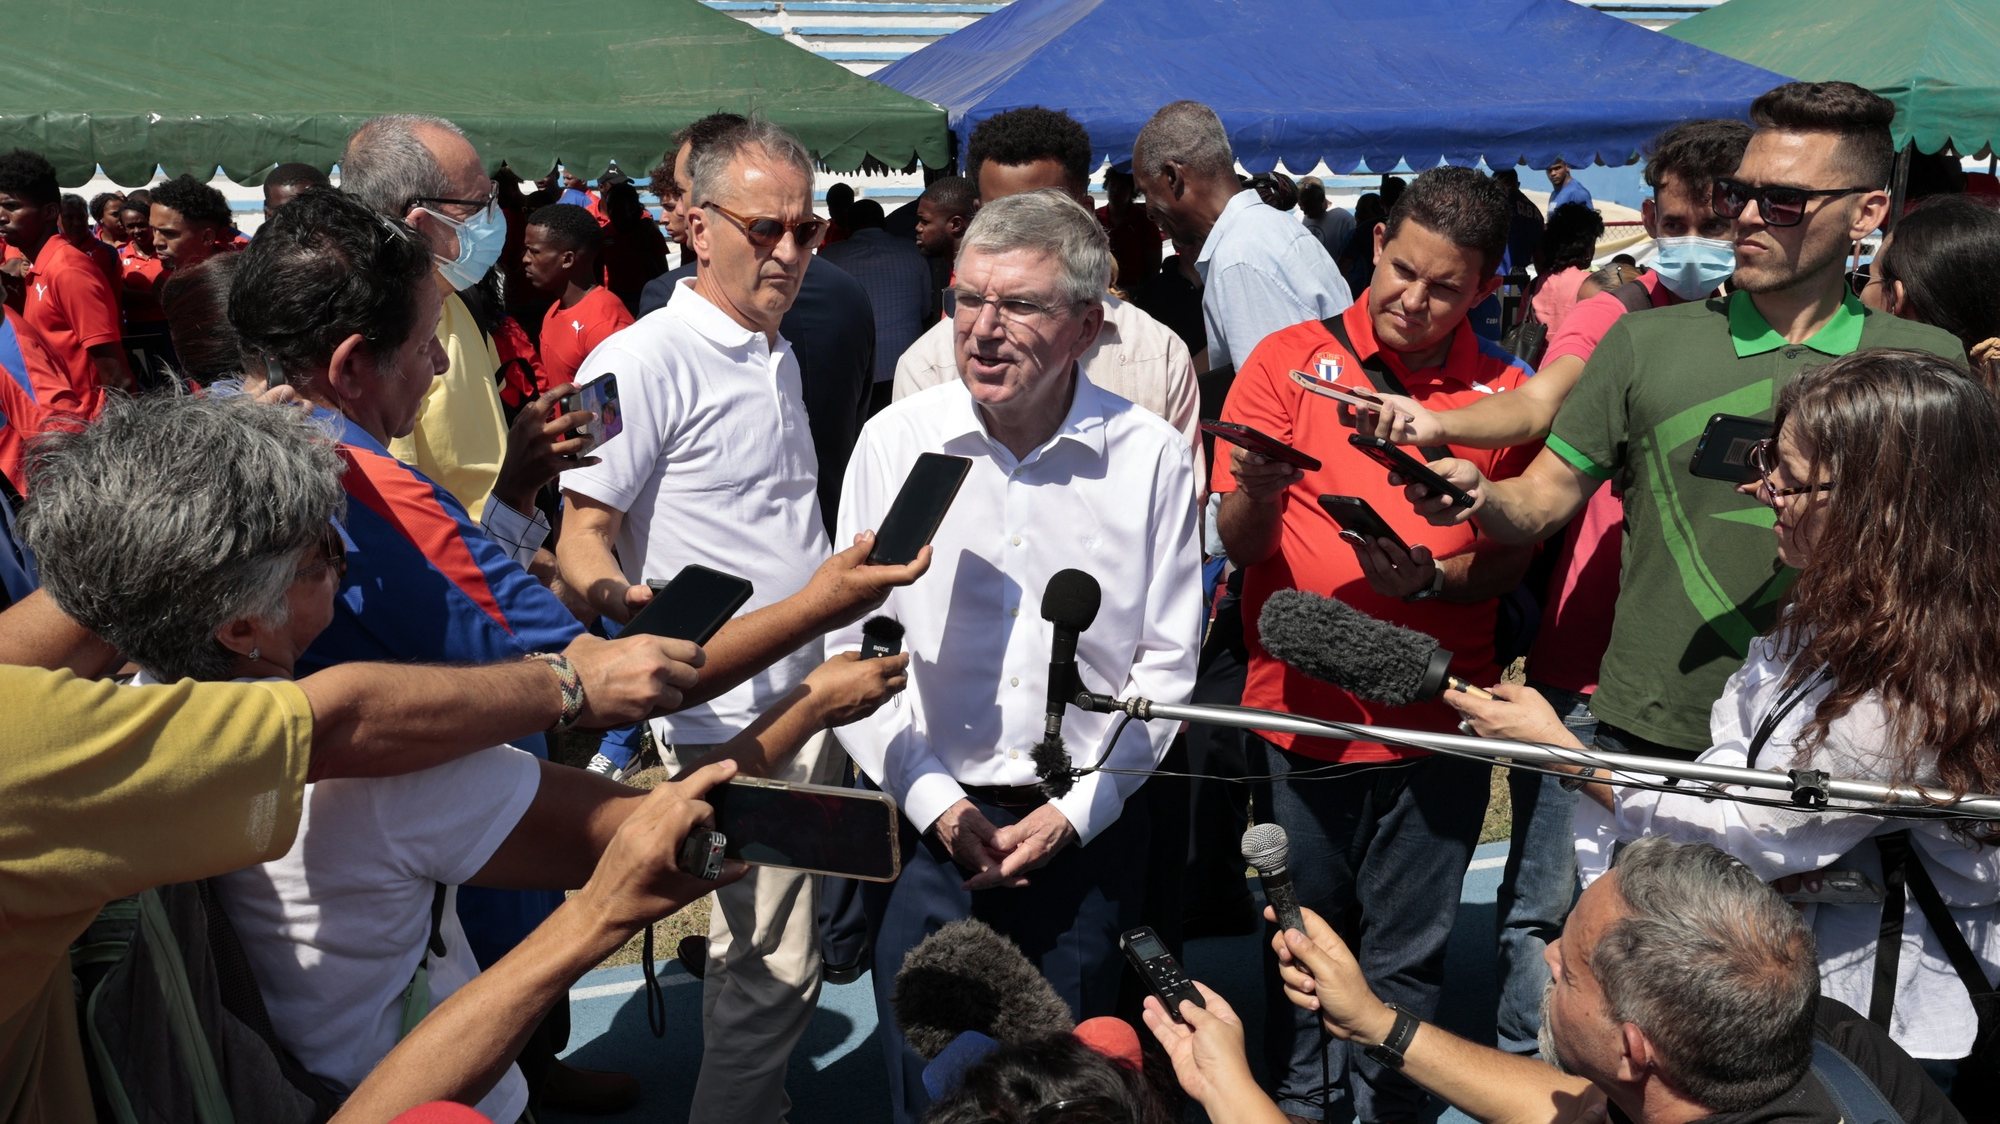 epa10501293 The president of the International Olympic Committee (IOC), the German Thomas Bach (C), speaks with journalists during a tour for the inauguration of an athletics track in Havana, Cuba, 03 March 2023. Bach is on a two-day visit to Cuba that started on 02 March.  EPA/Ernesto Mastrascusa